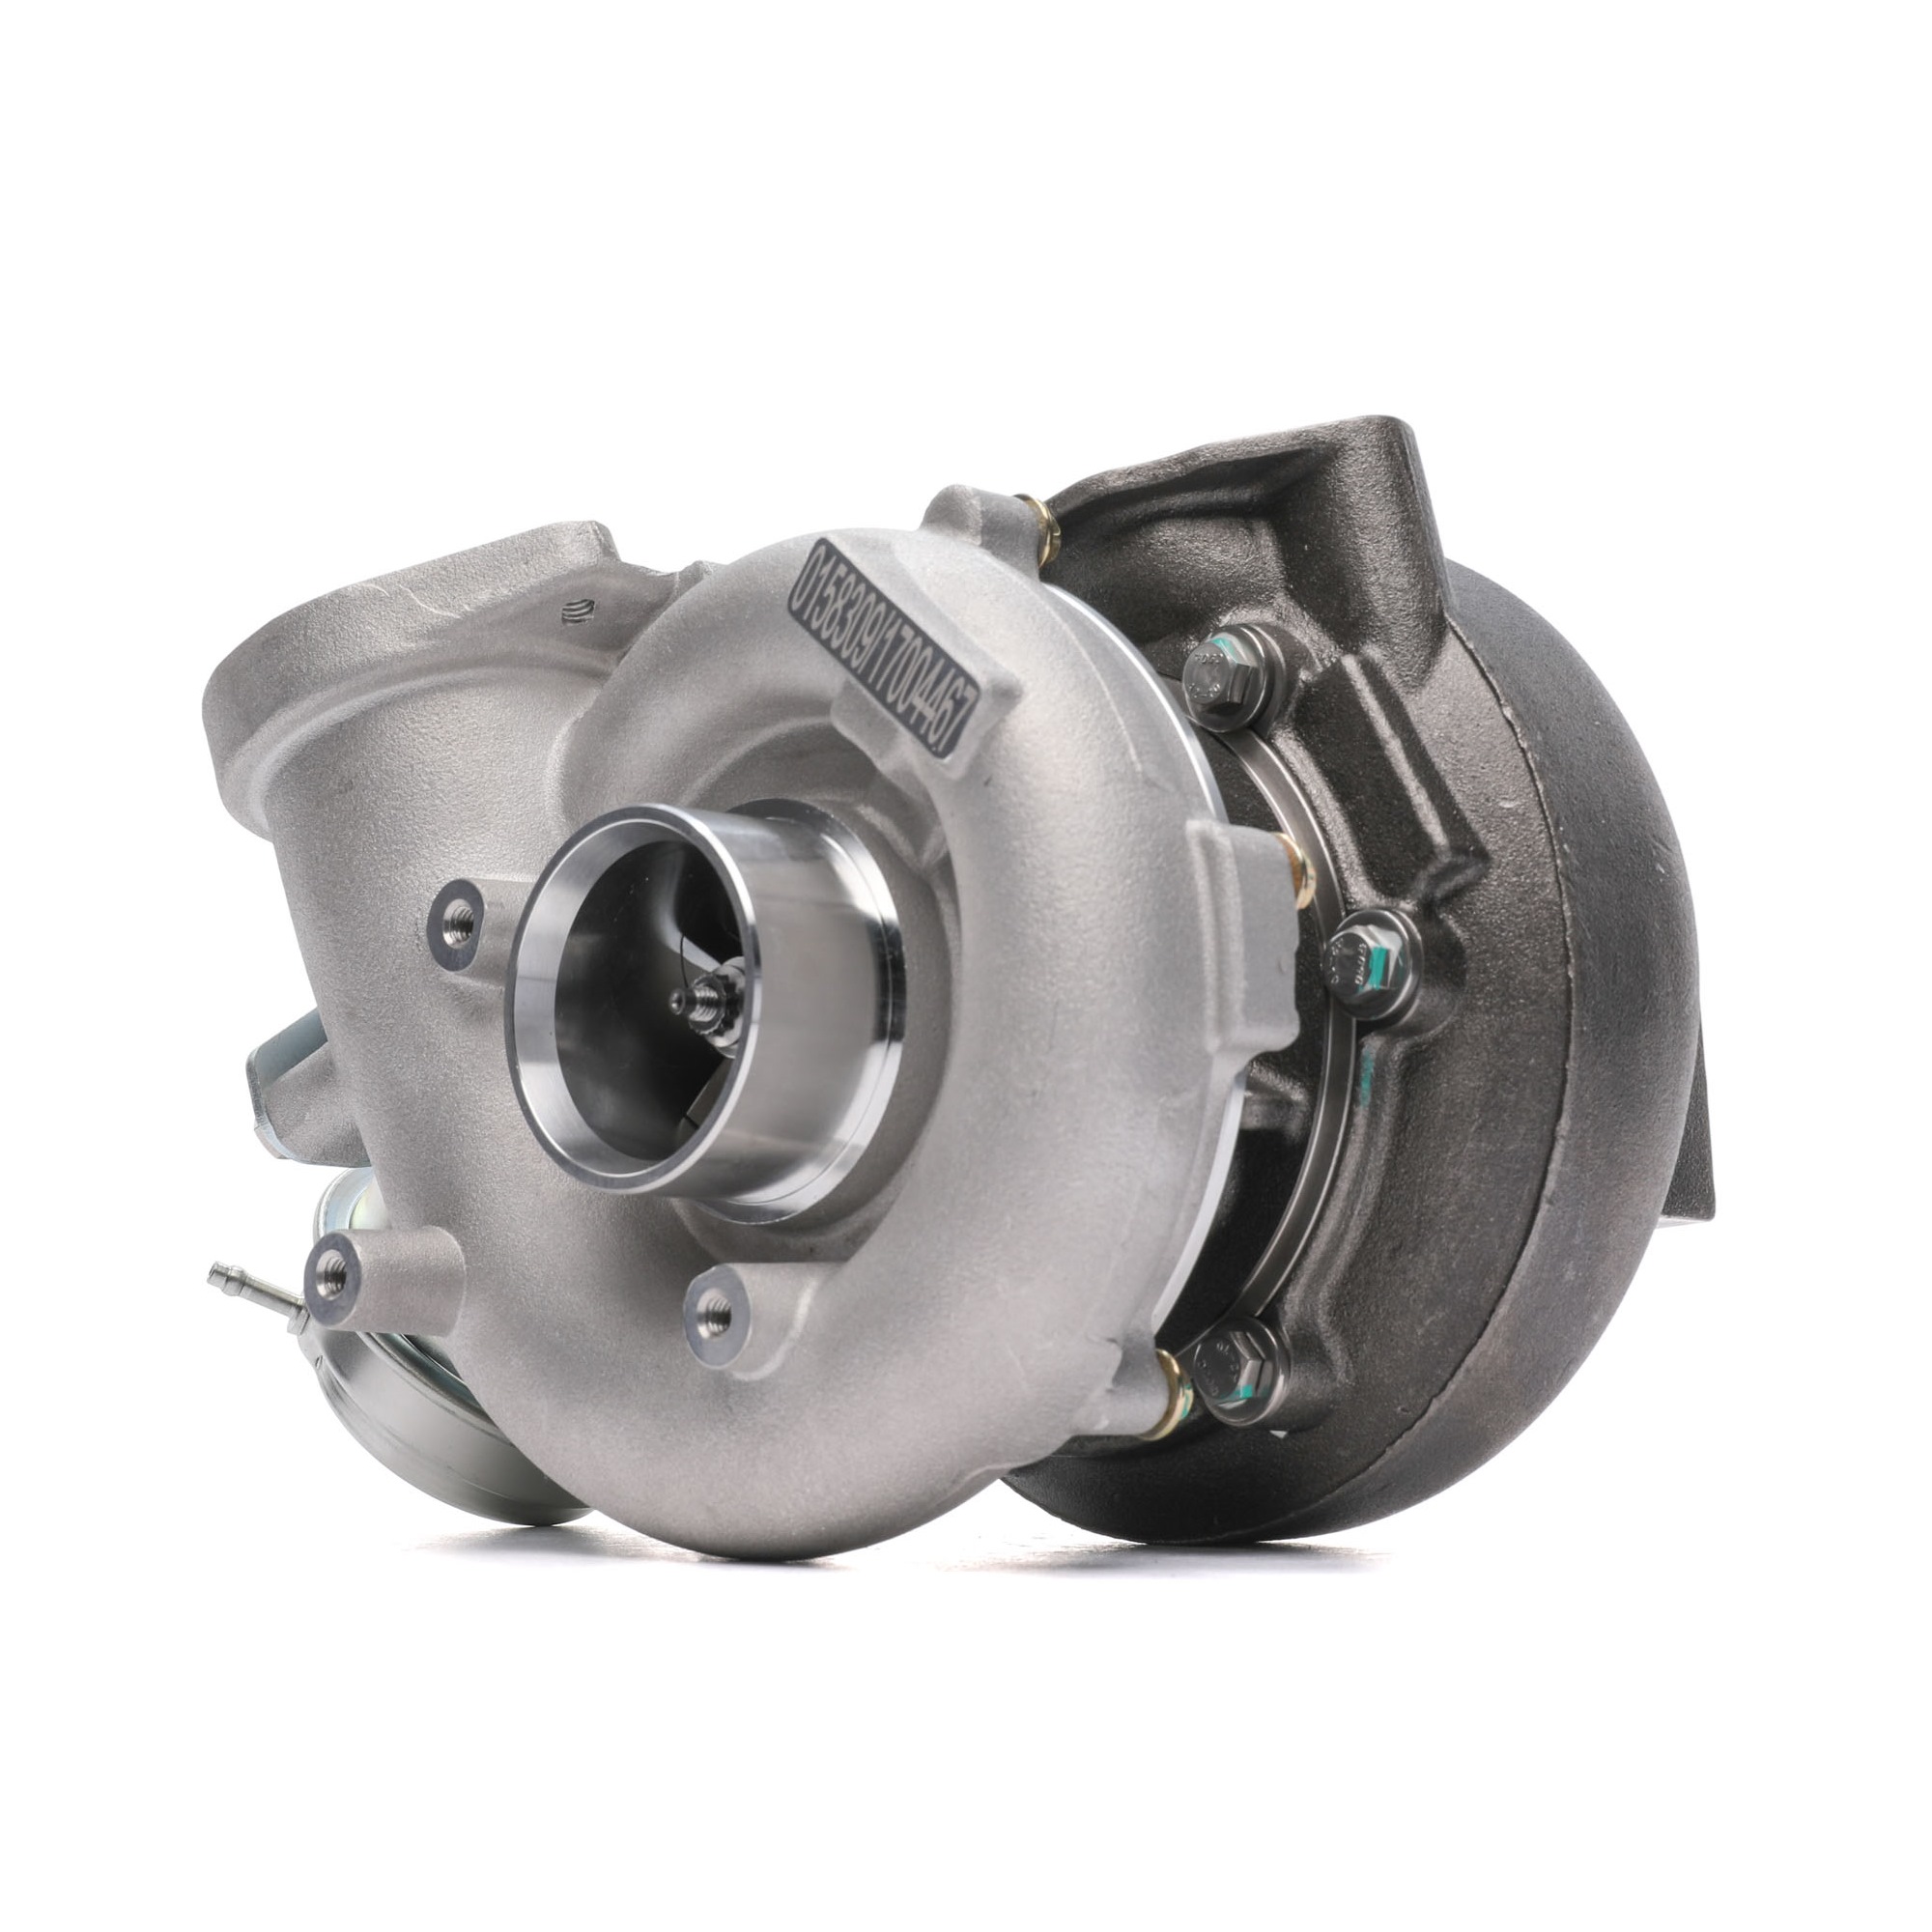 STARK SKCT-1191208 Turbocharger Turbo, Pneumatic, without attachment material